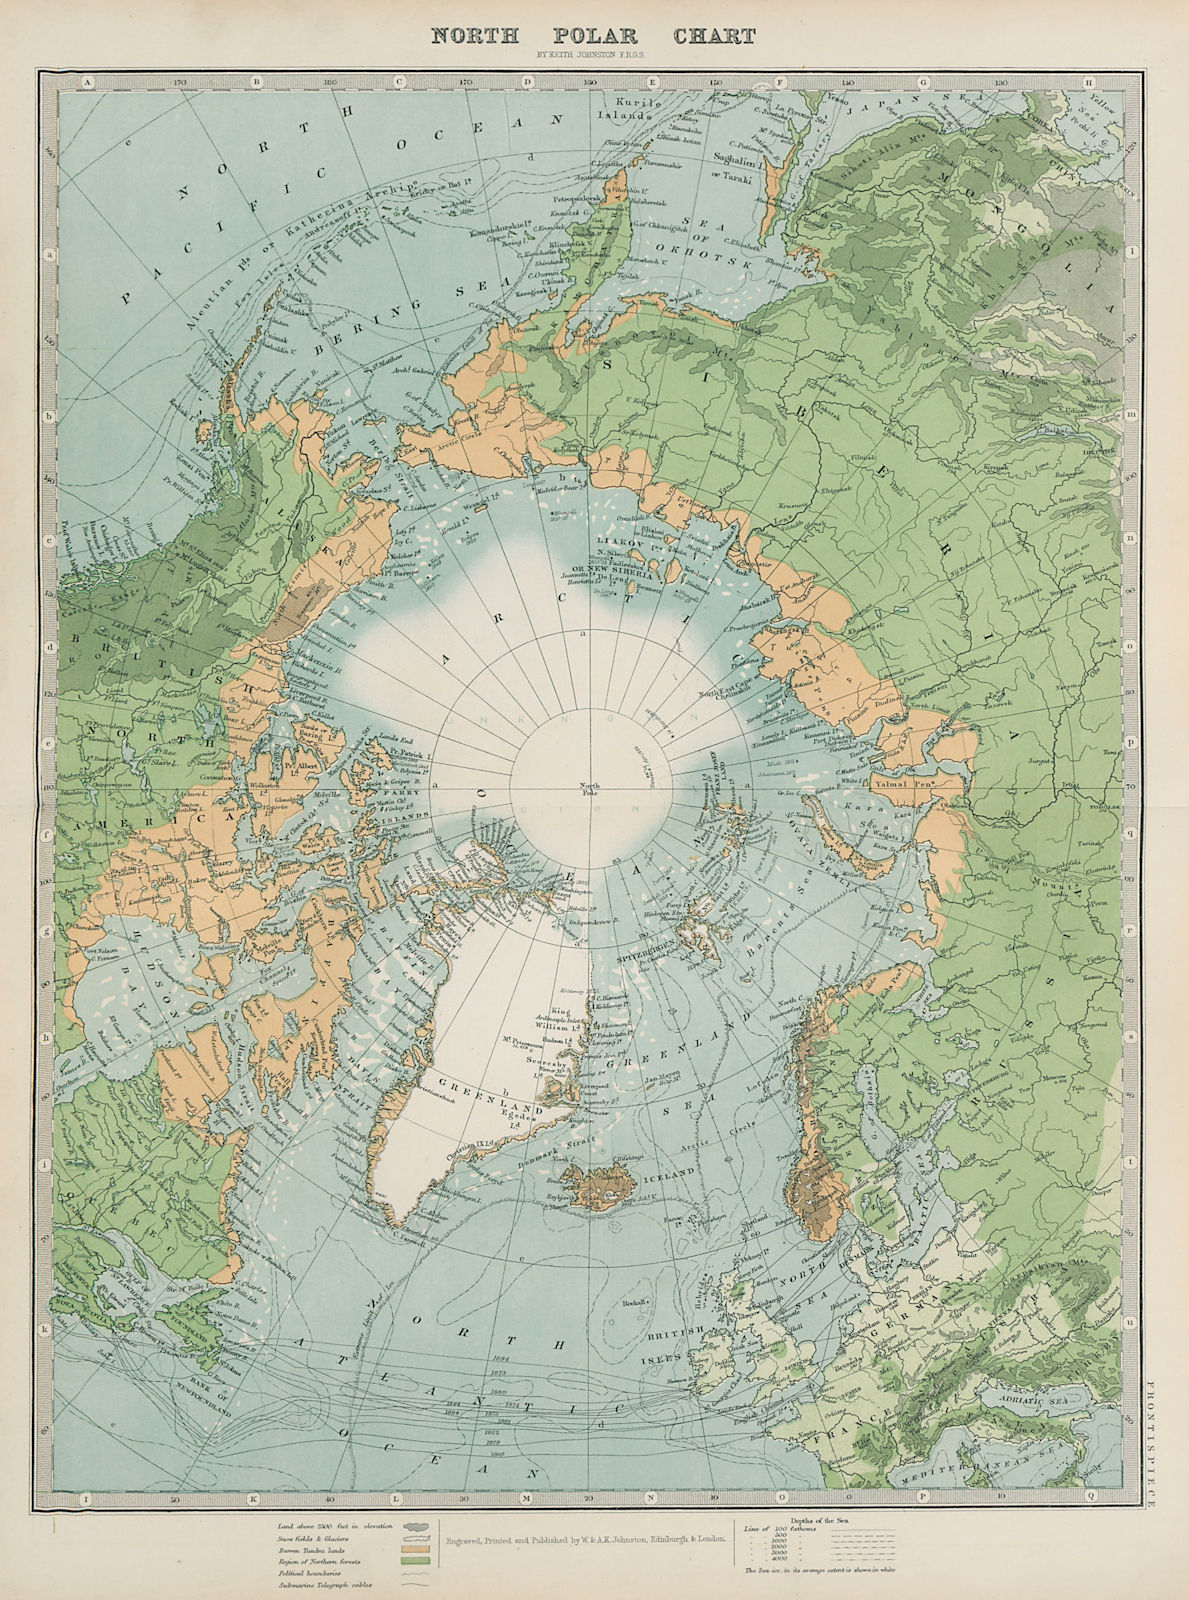 Associate Product ARCTIC North Polar chart Telegraph cables Ice limit JOHNSTON 1901 old map